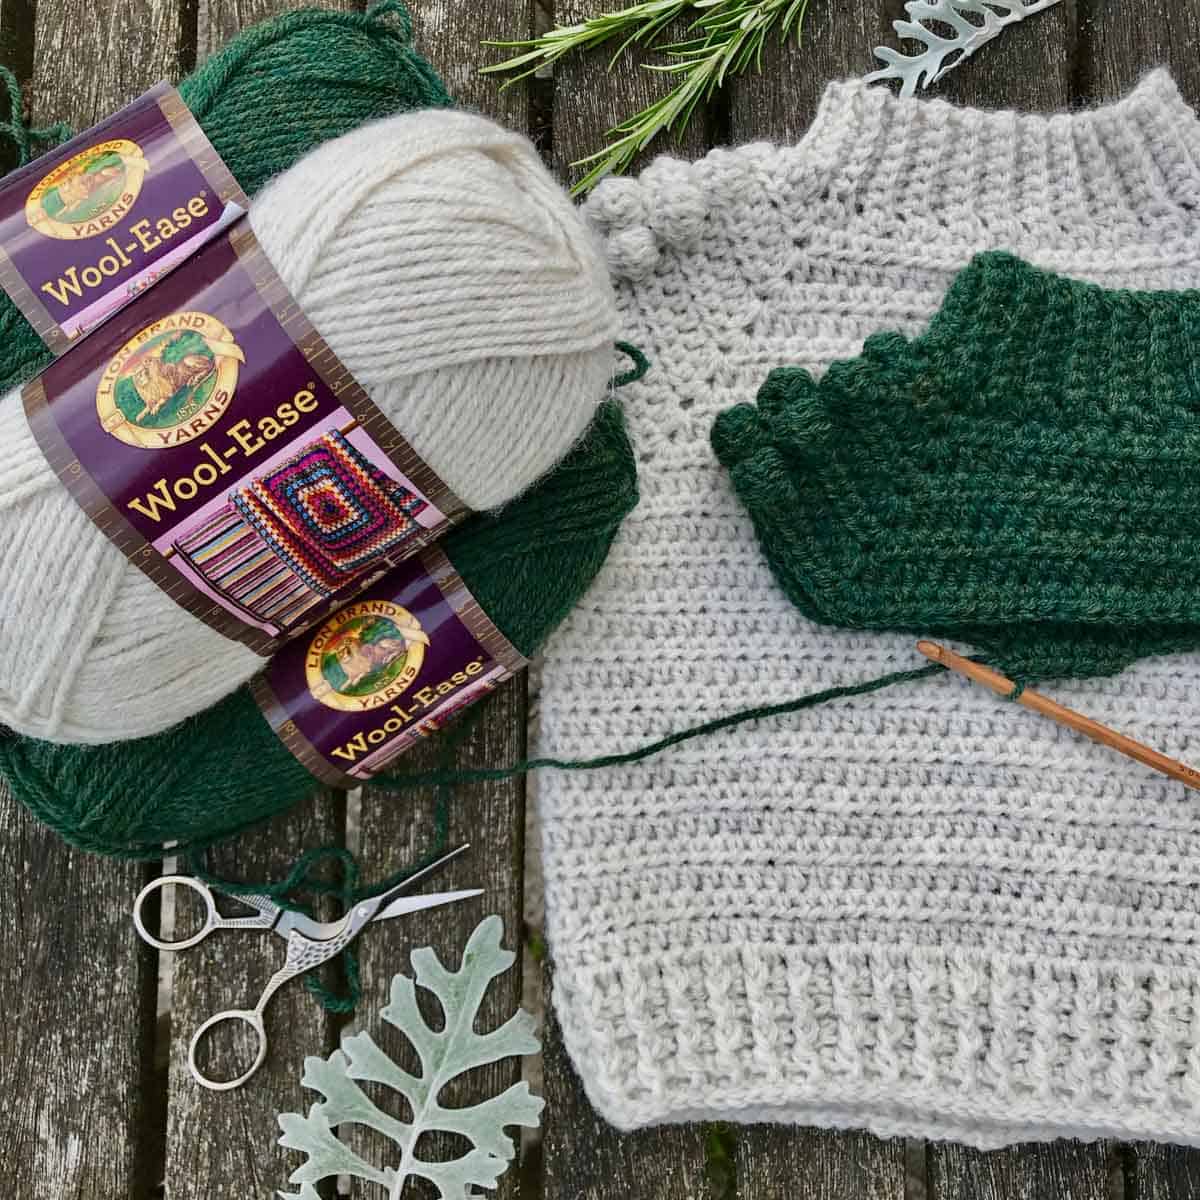 Free crochet pattern for a children's pullover sweater made with Lion Brand Wool-Ease yarn in colors Natural Heather and Forest Green Heather.